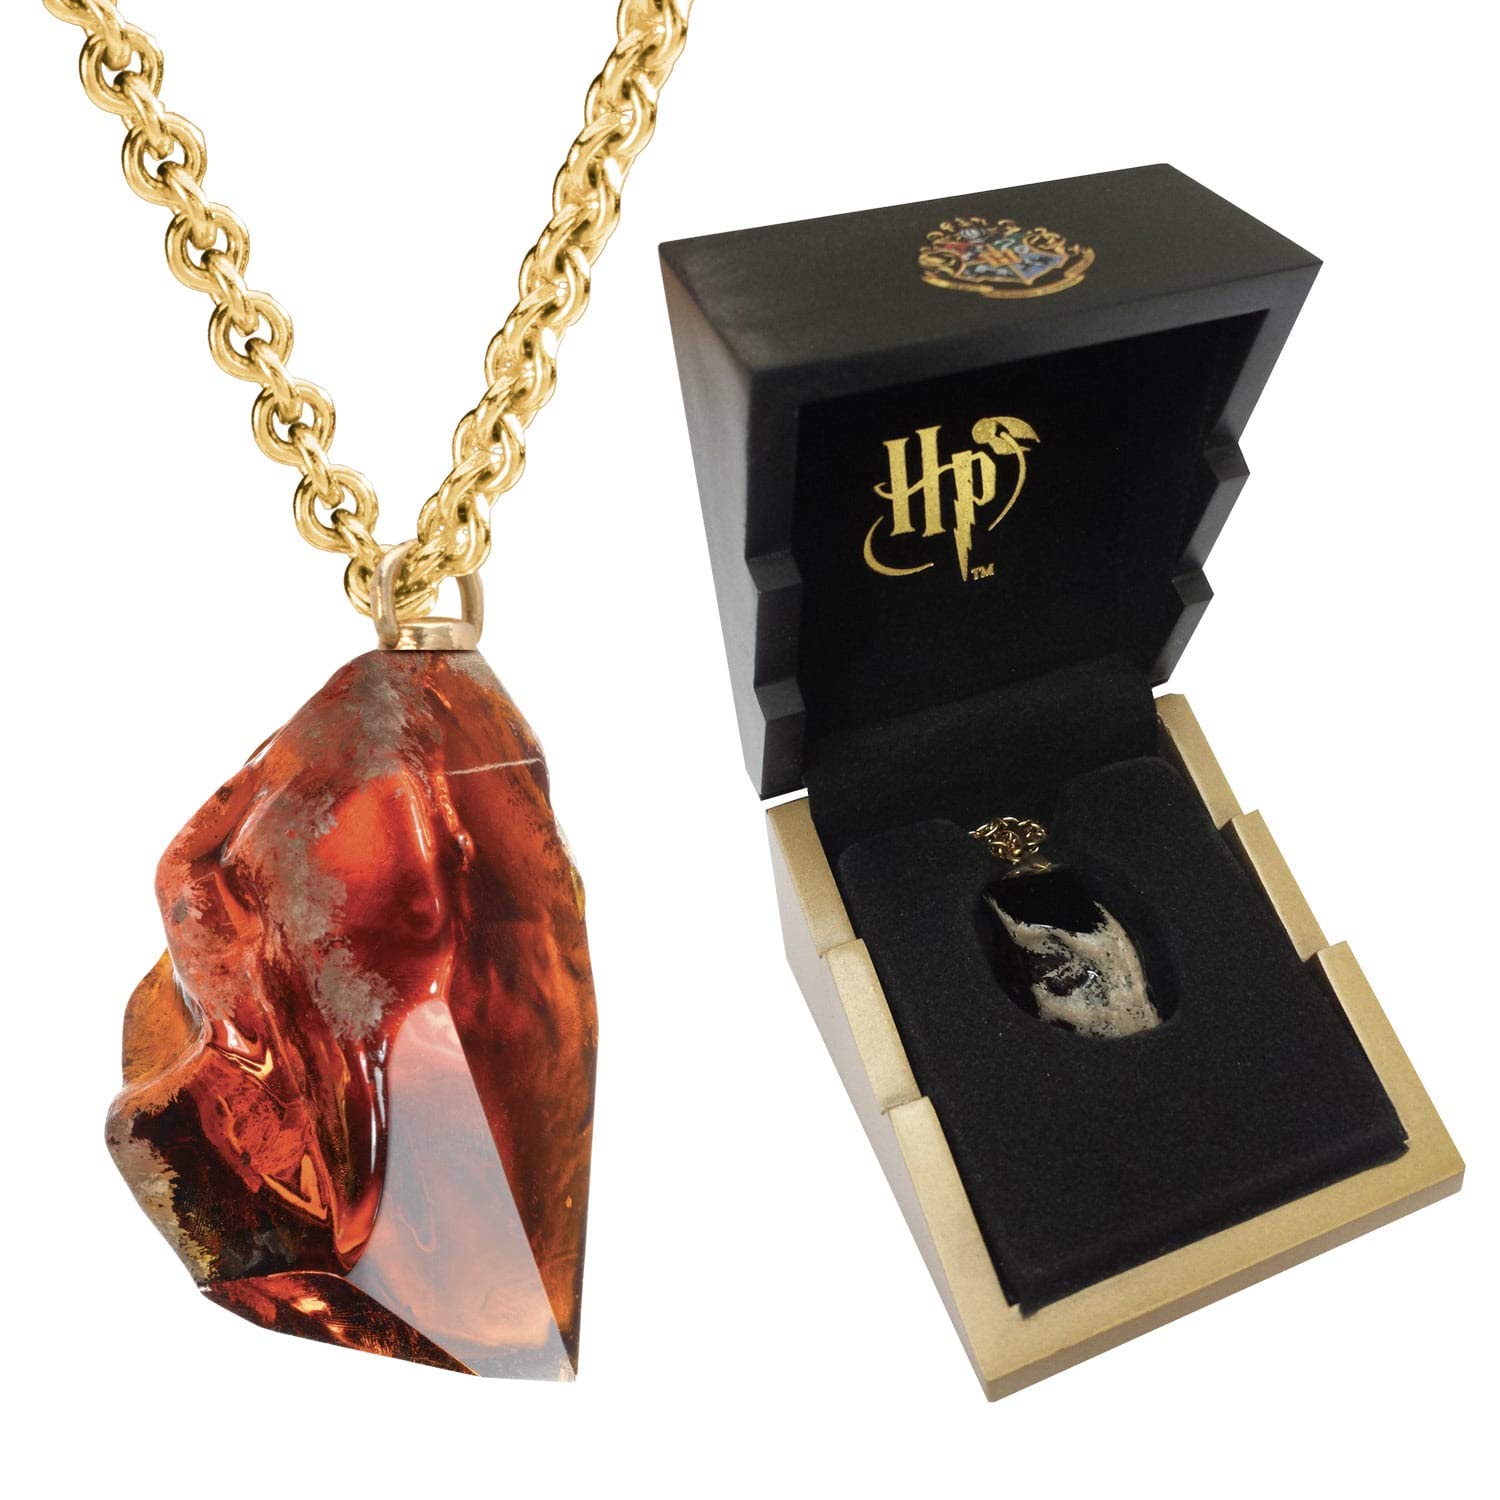 The Noble Collection Philosophers Stone Pendant